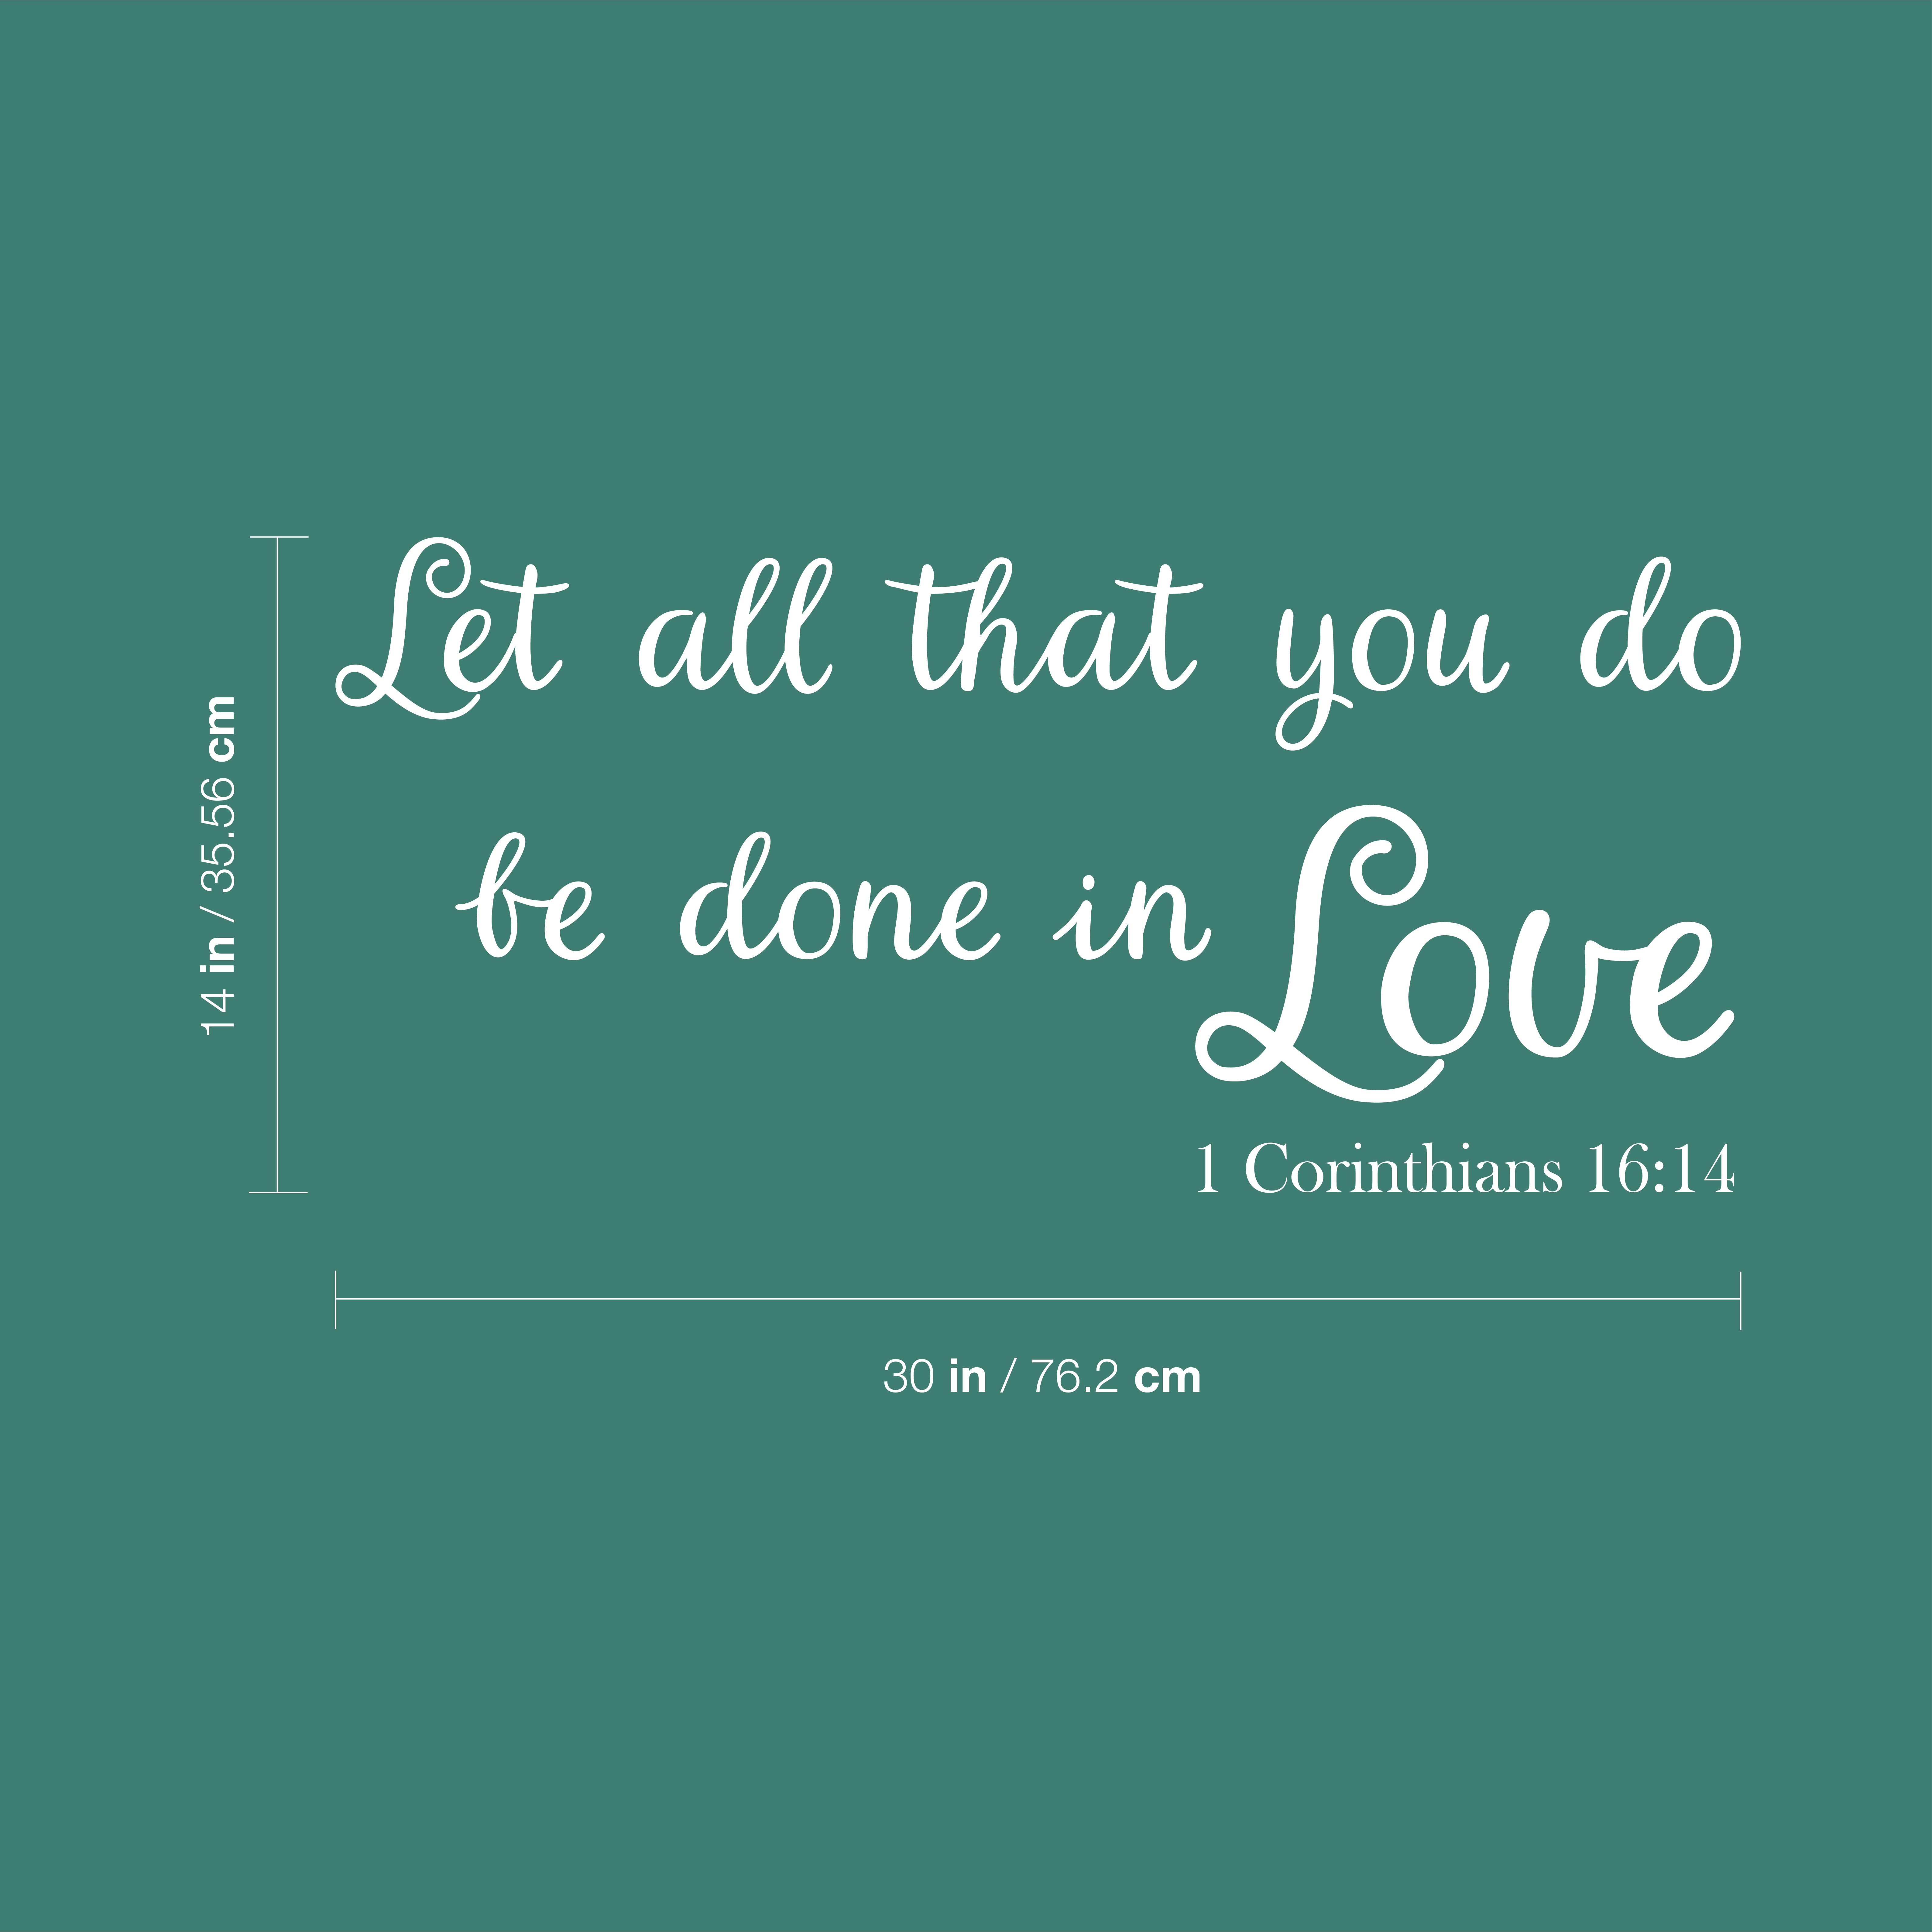 let all that you do be done in love desktop background